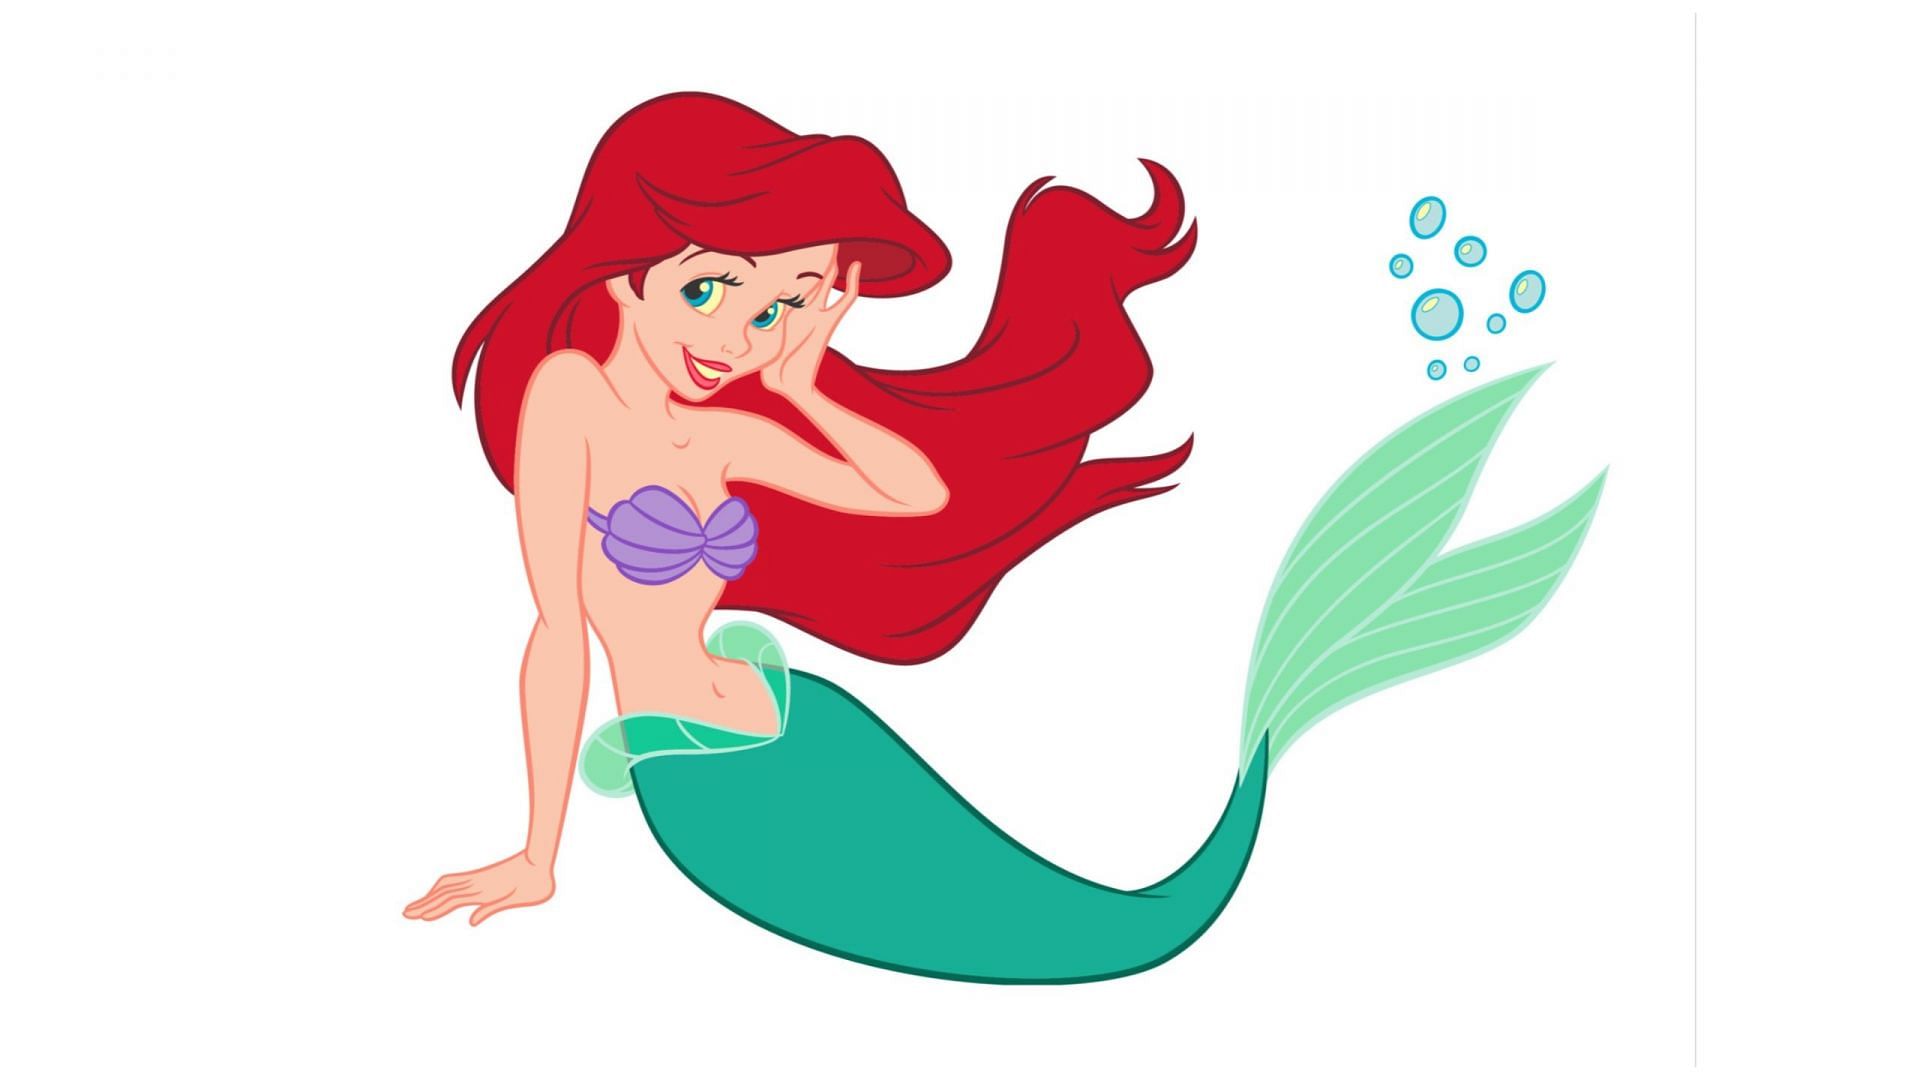 Our princess from the sea also appears on the list of disney princess mental disorders. (Image via Vecteezy/ Muza DS)